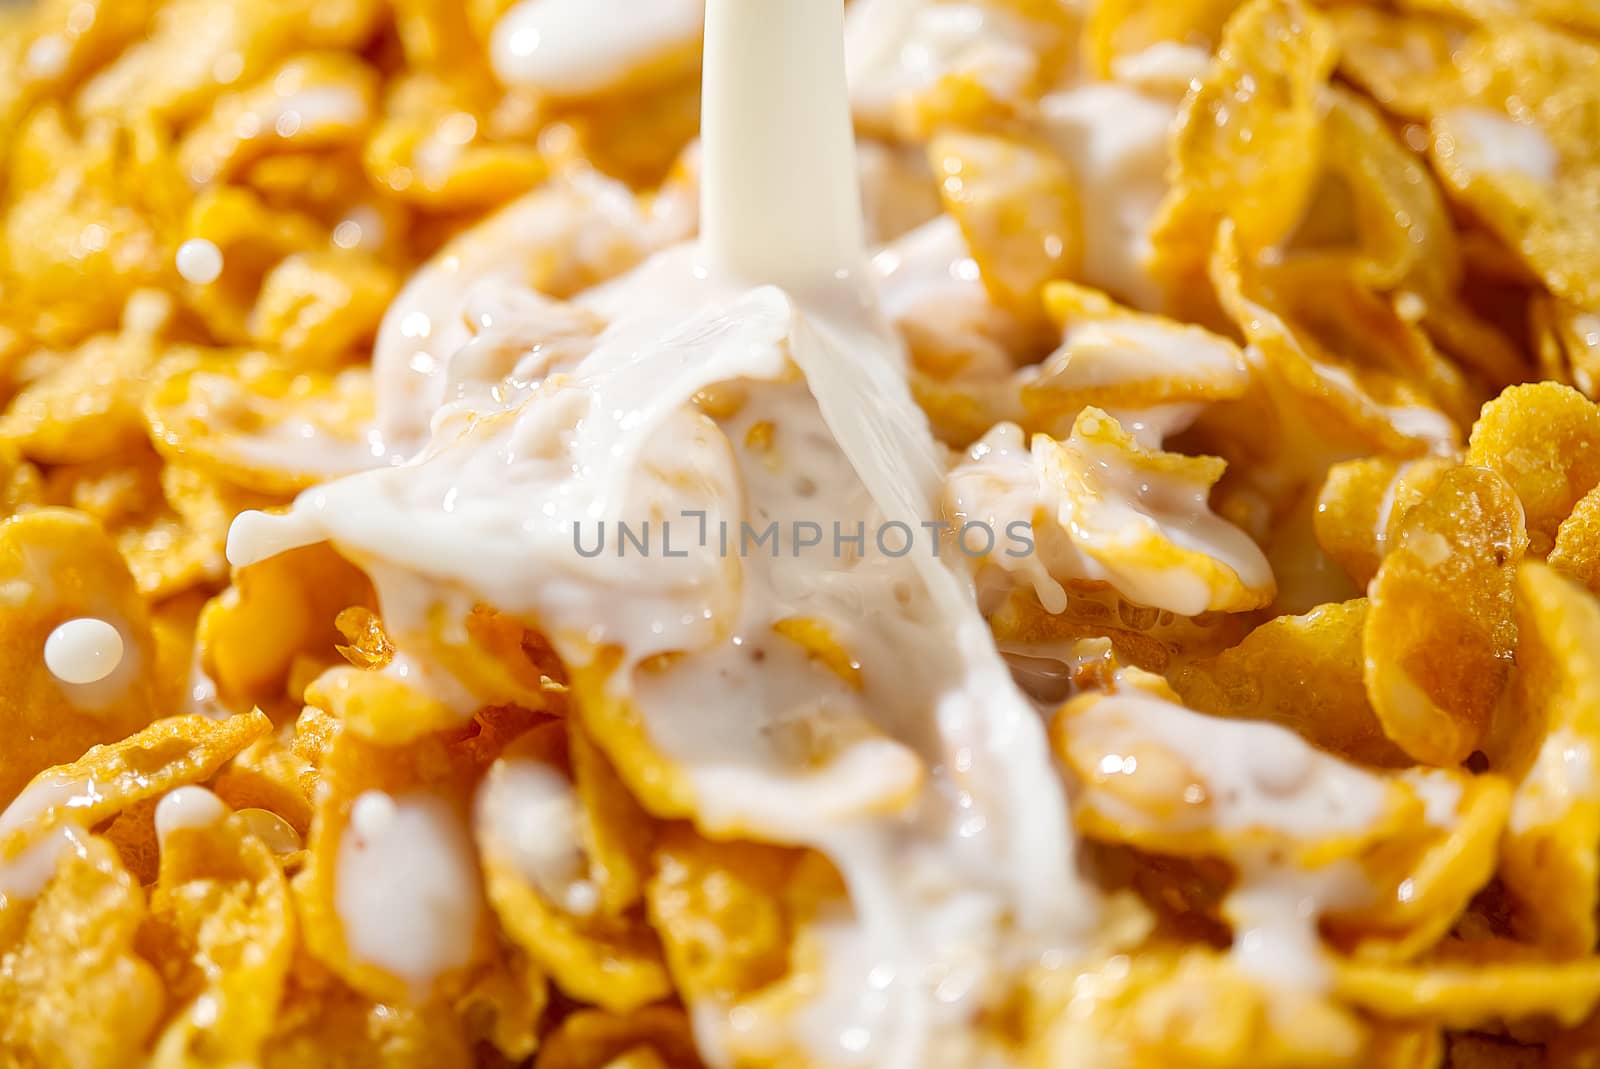 pouring milk into cornflakes close up. soft focus. cornflakes and milk, breakfast concept by PhotoTime